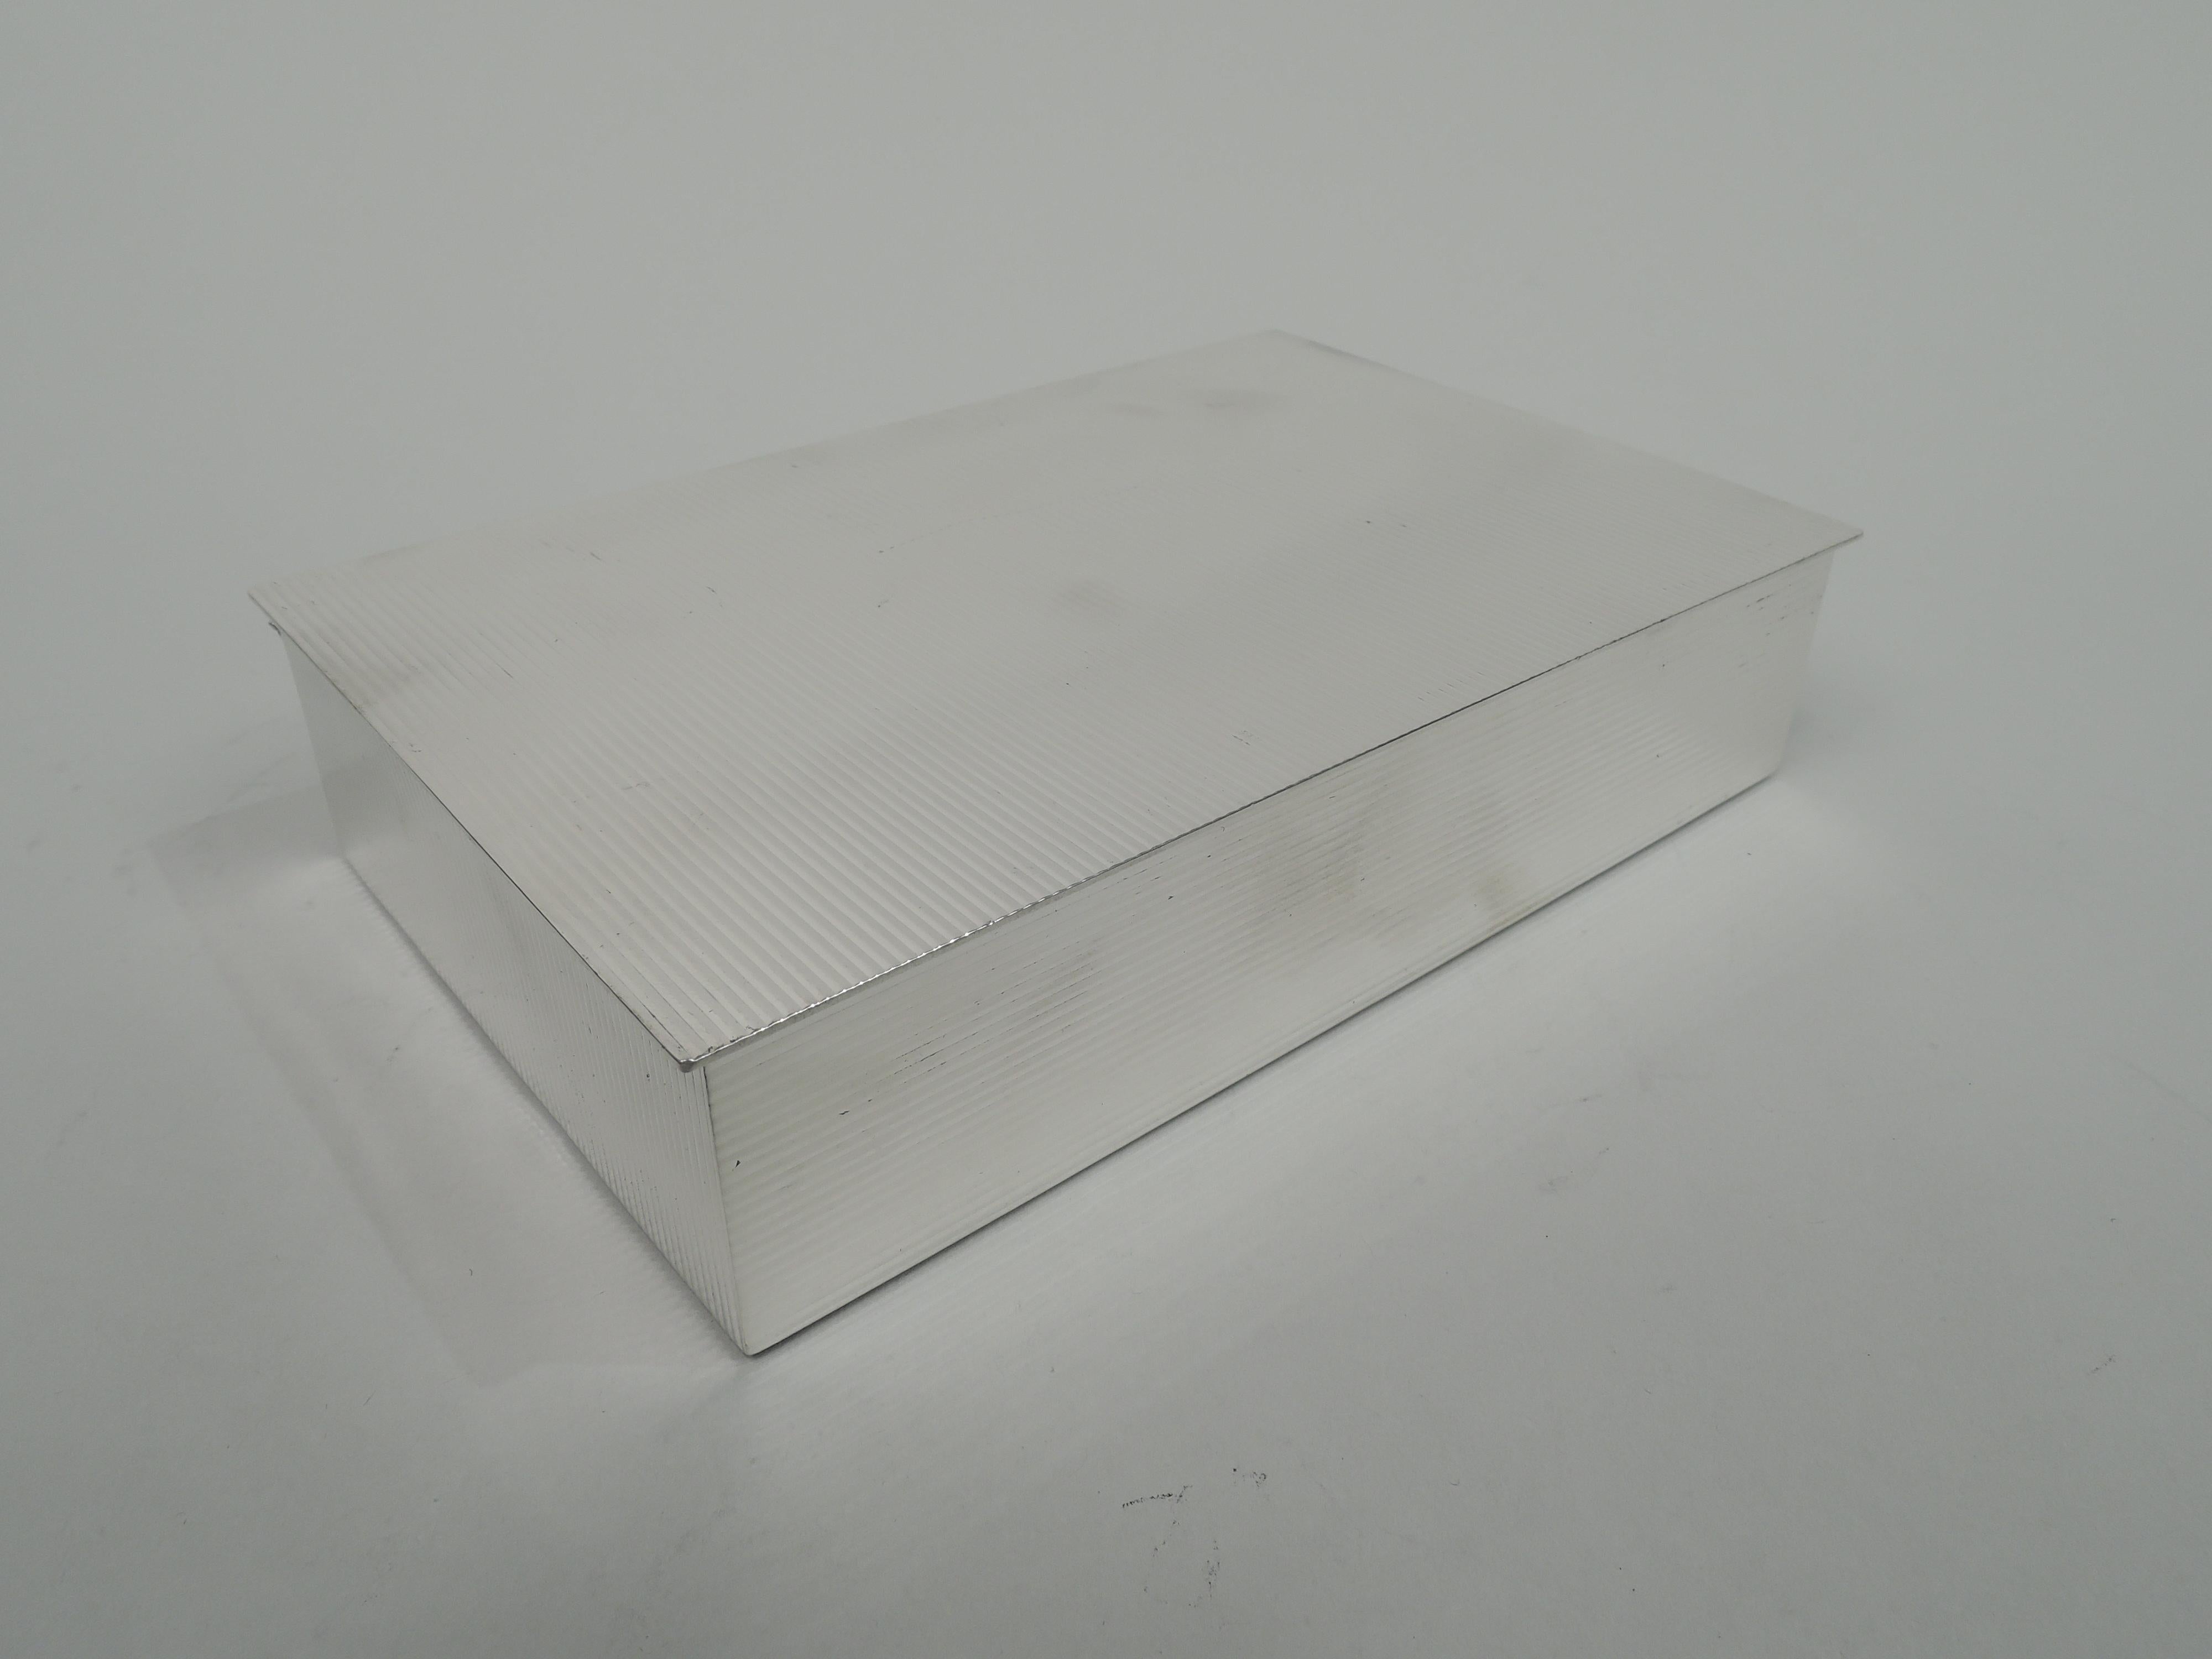 Midcentury Classical sterling silver box. Rectangular with straight sides. Cover flat and hinged with slight overhang. Allover horizontal ribbing with slightly illusionistic shimmer: Horizontal on front and back, and vertical on ends and cover top.